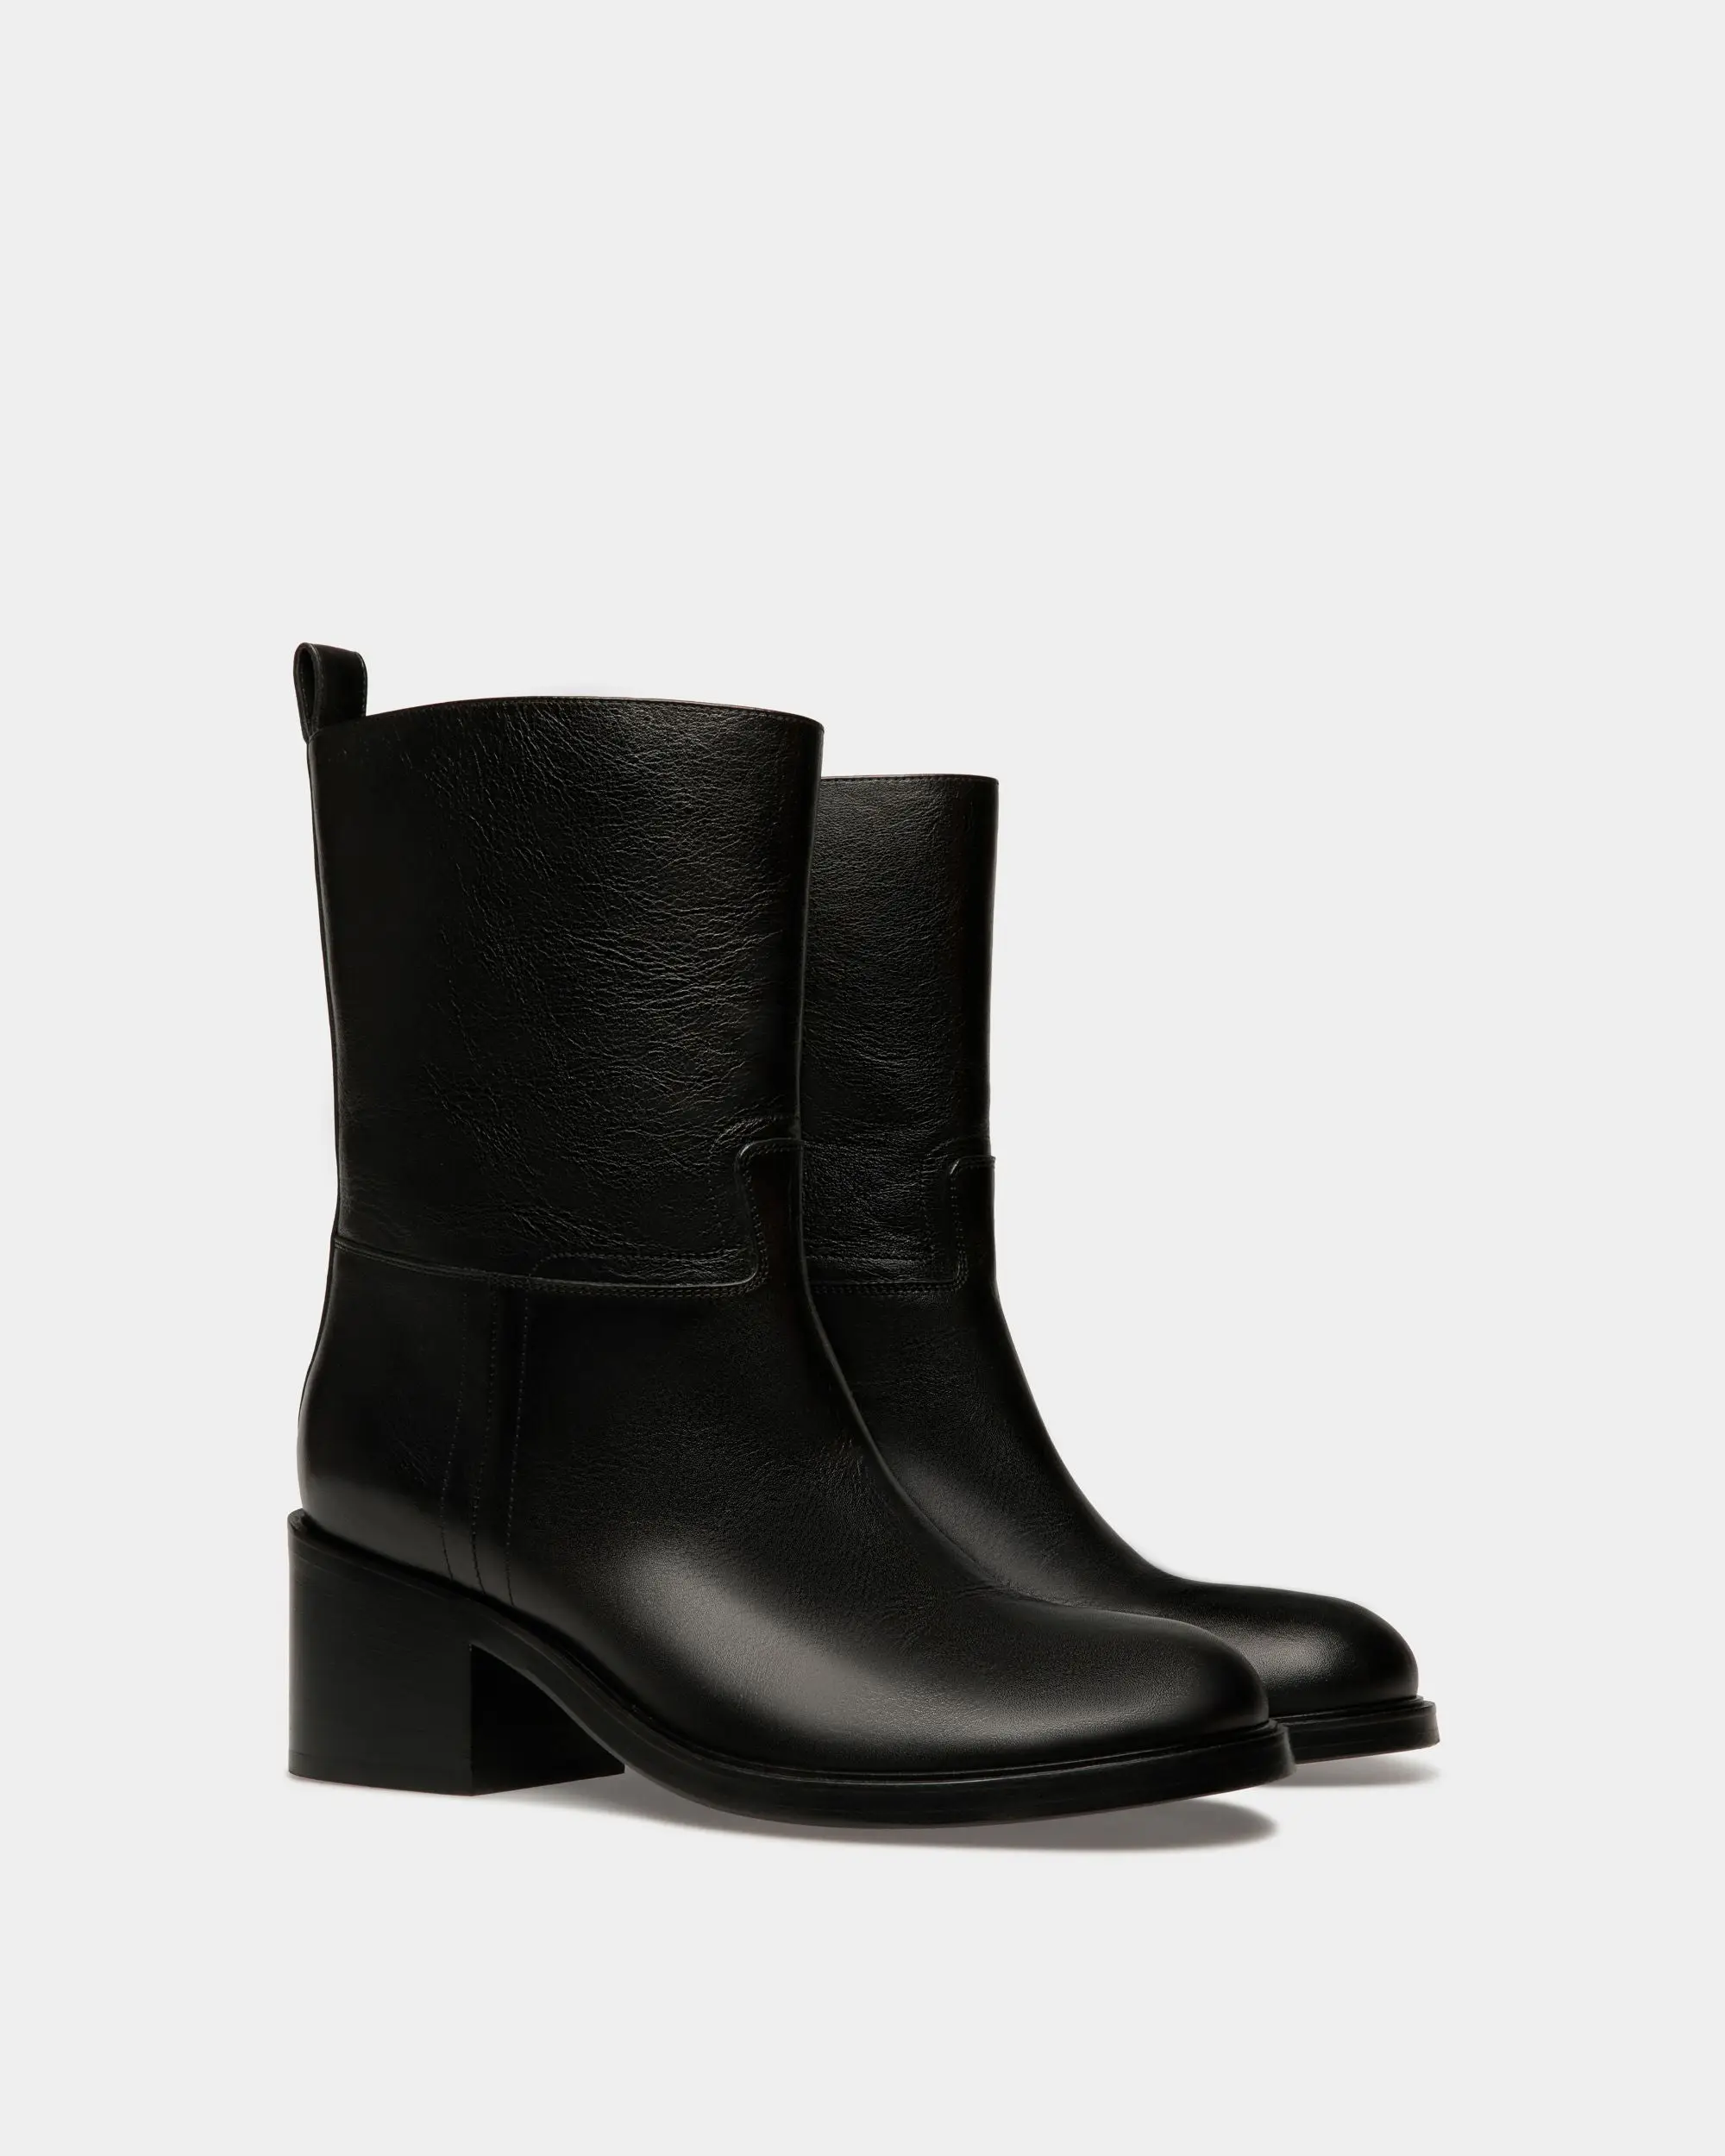 Peggy Boot in Black Leather